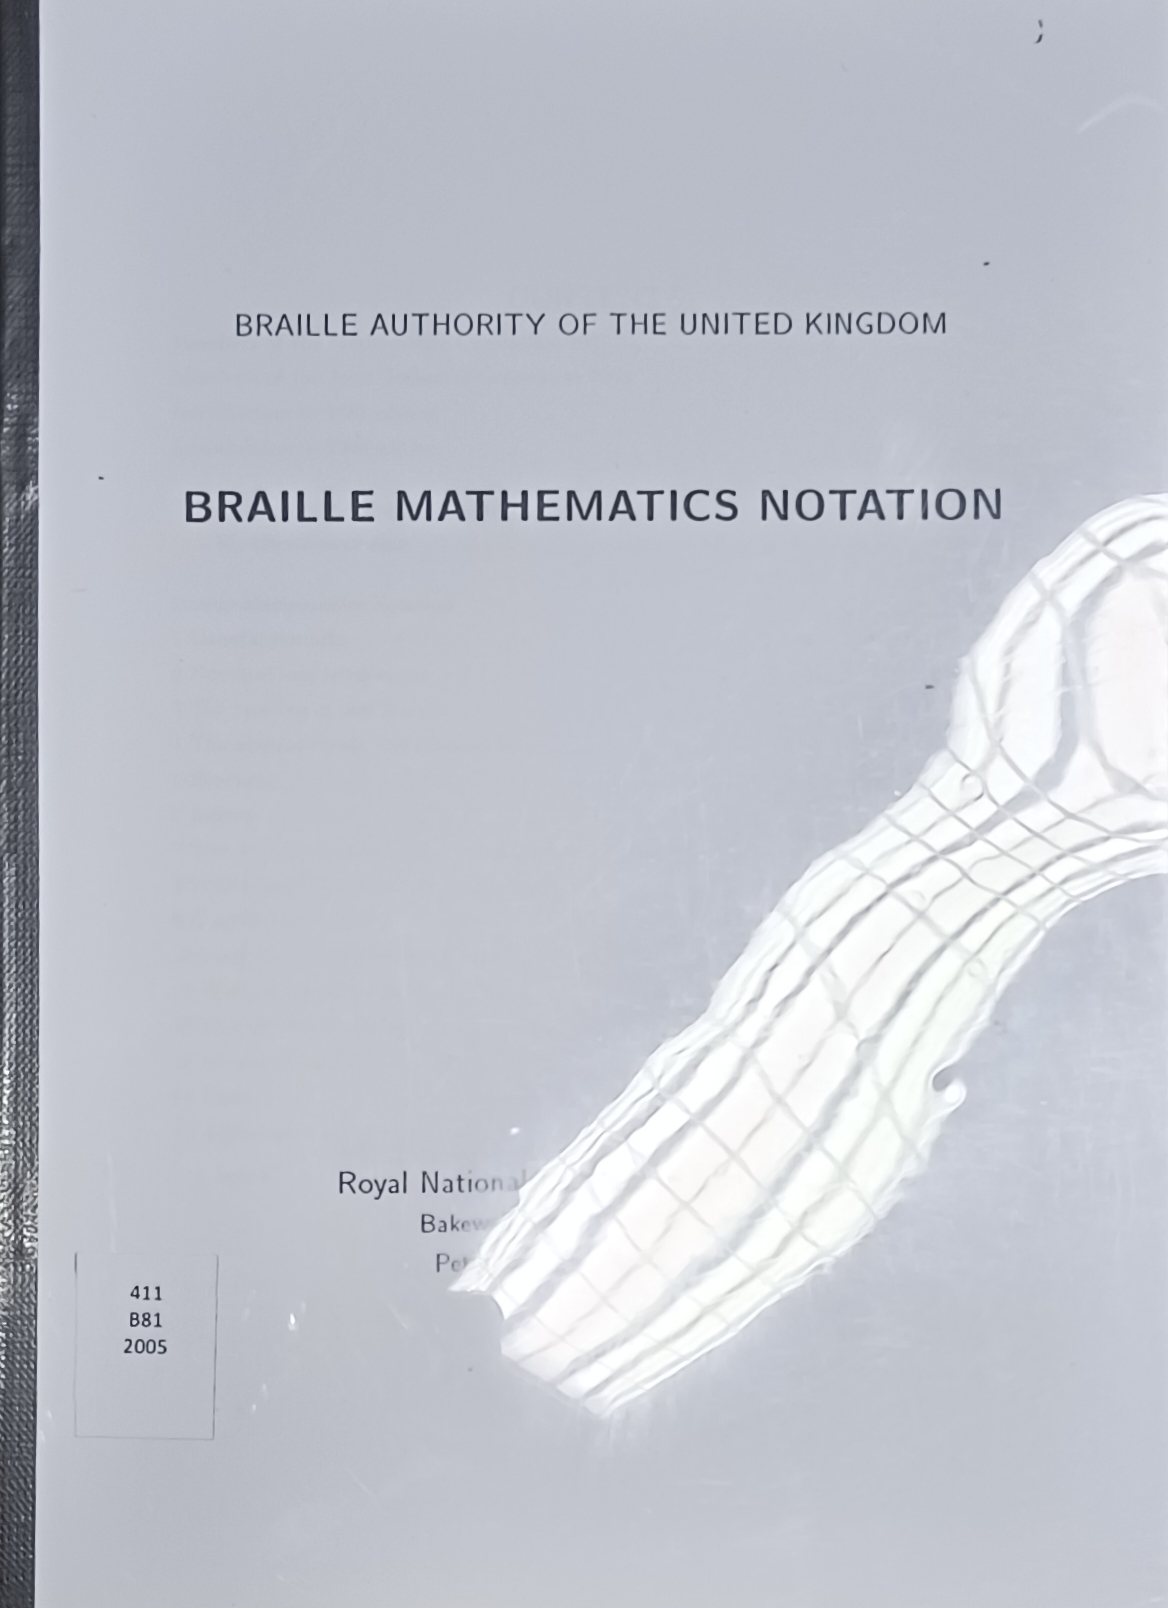 Cover image for Braille Mathematics Notation bibliographic